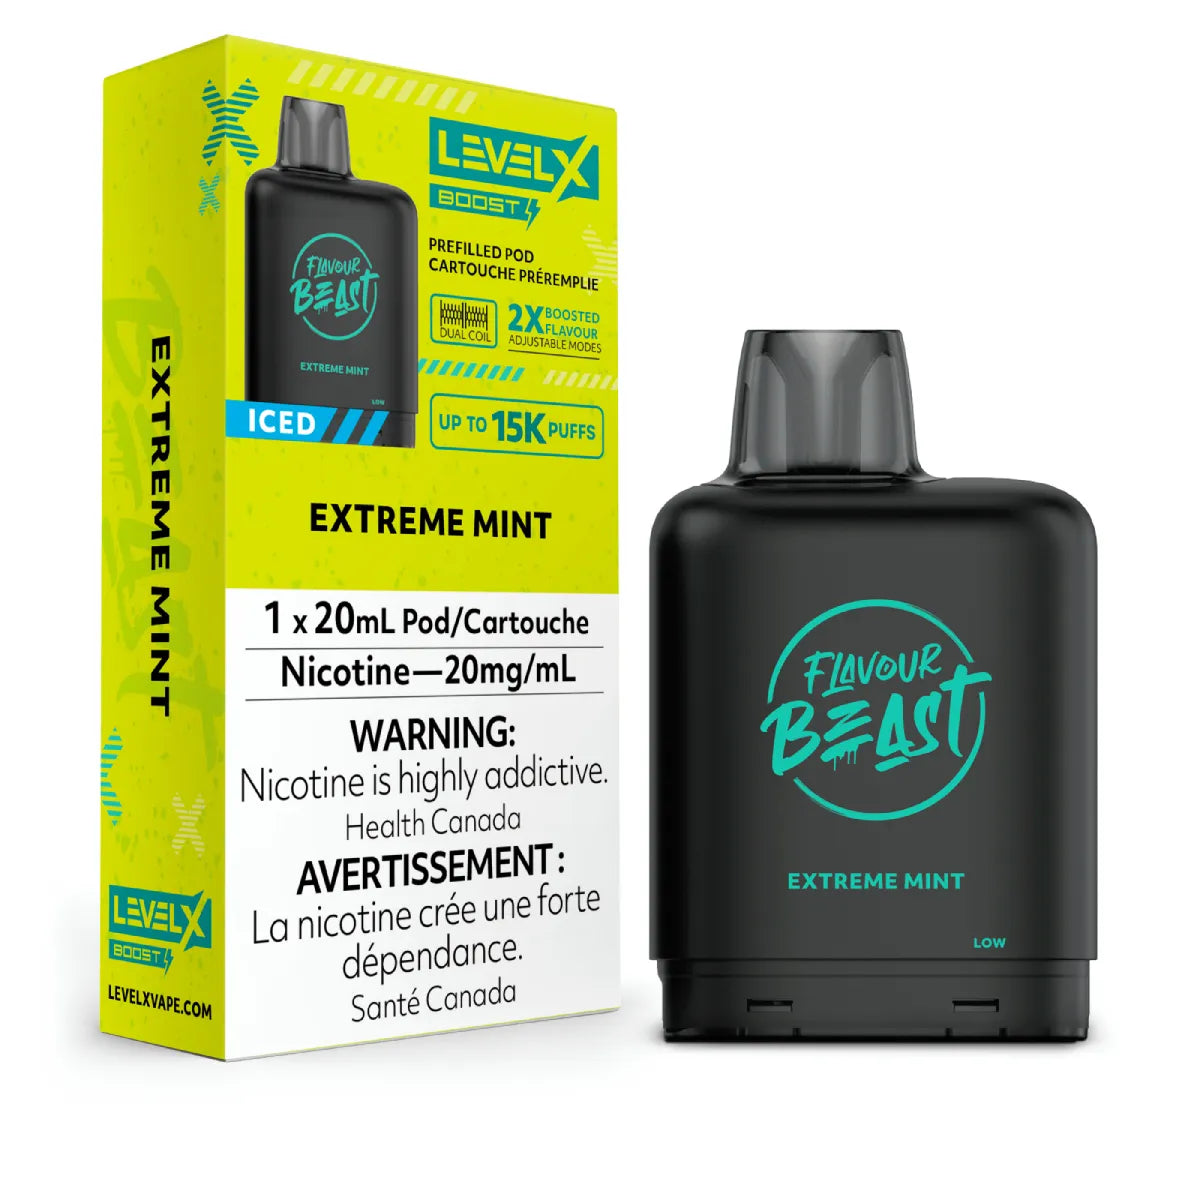 Extreme Mint Iced - Level X Flavour Beast Boost Pod 20mL - 6pc/Carton